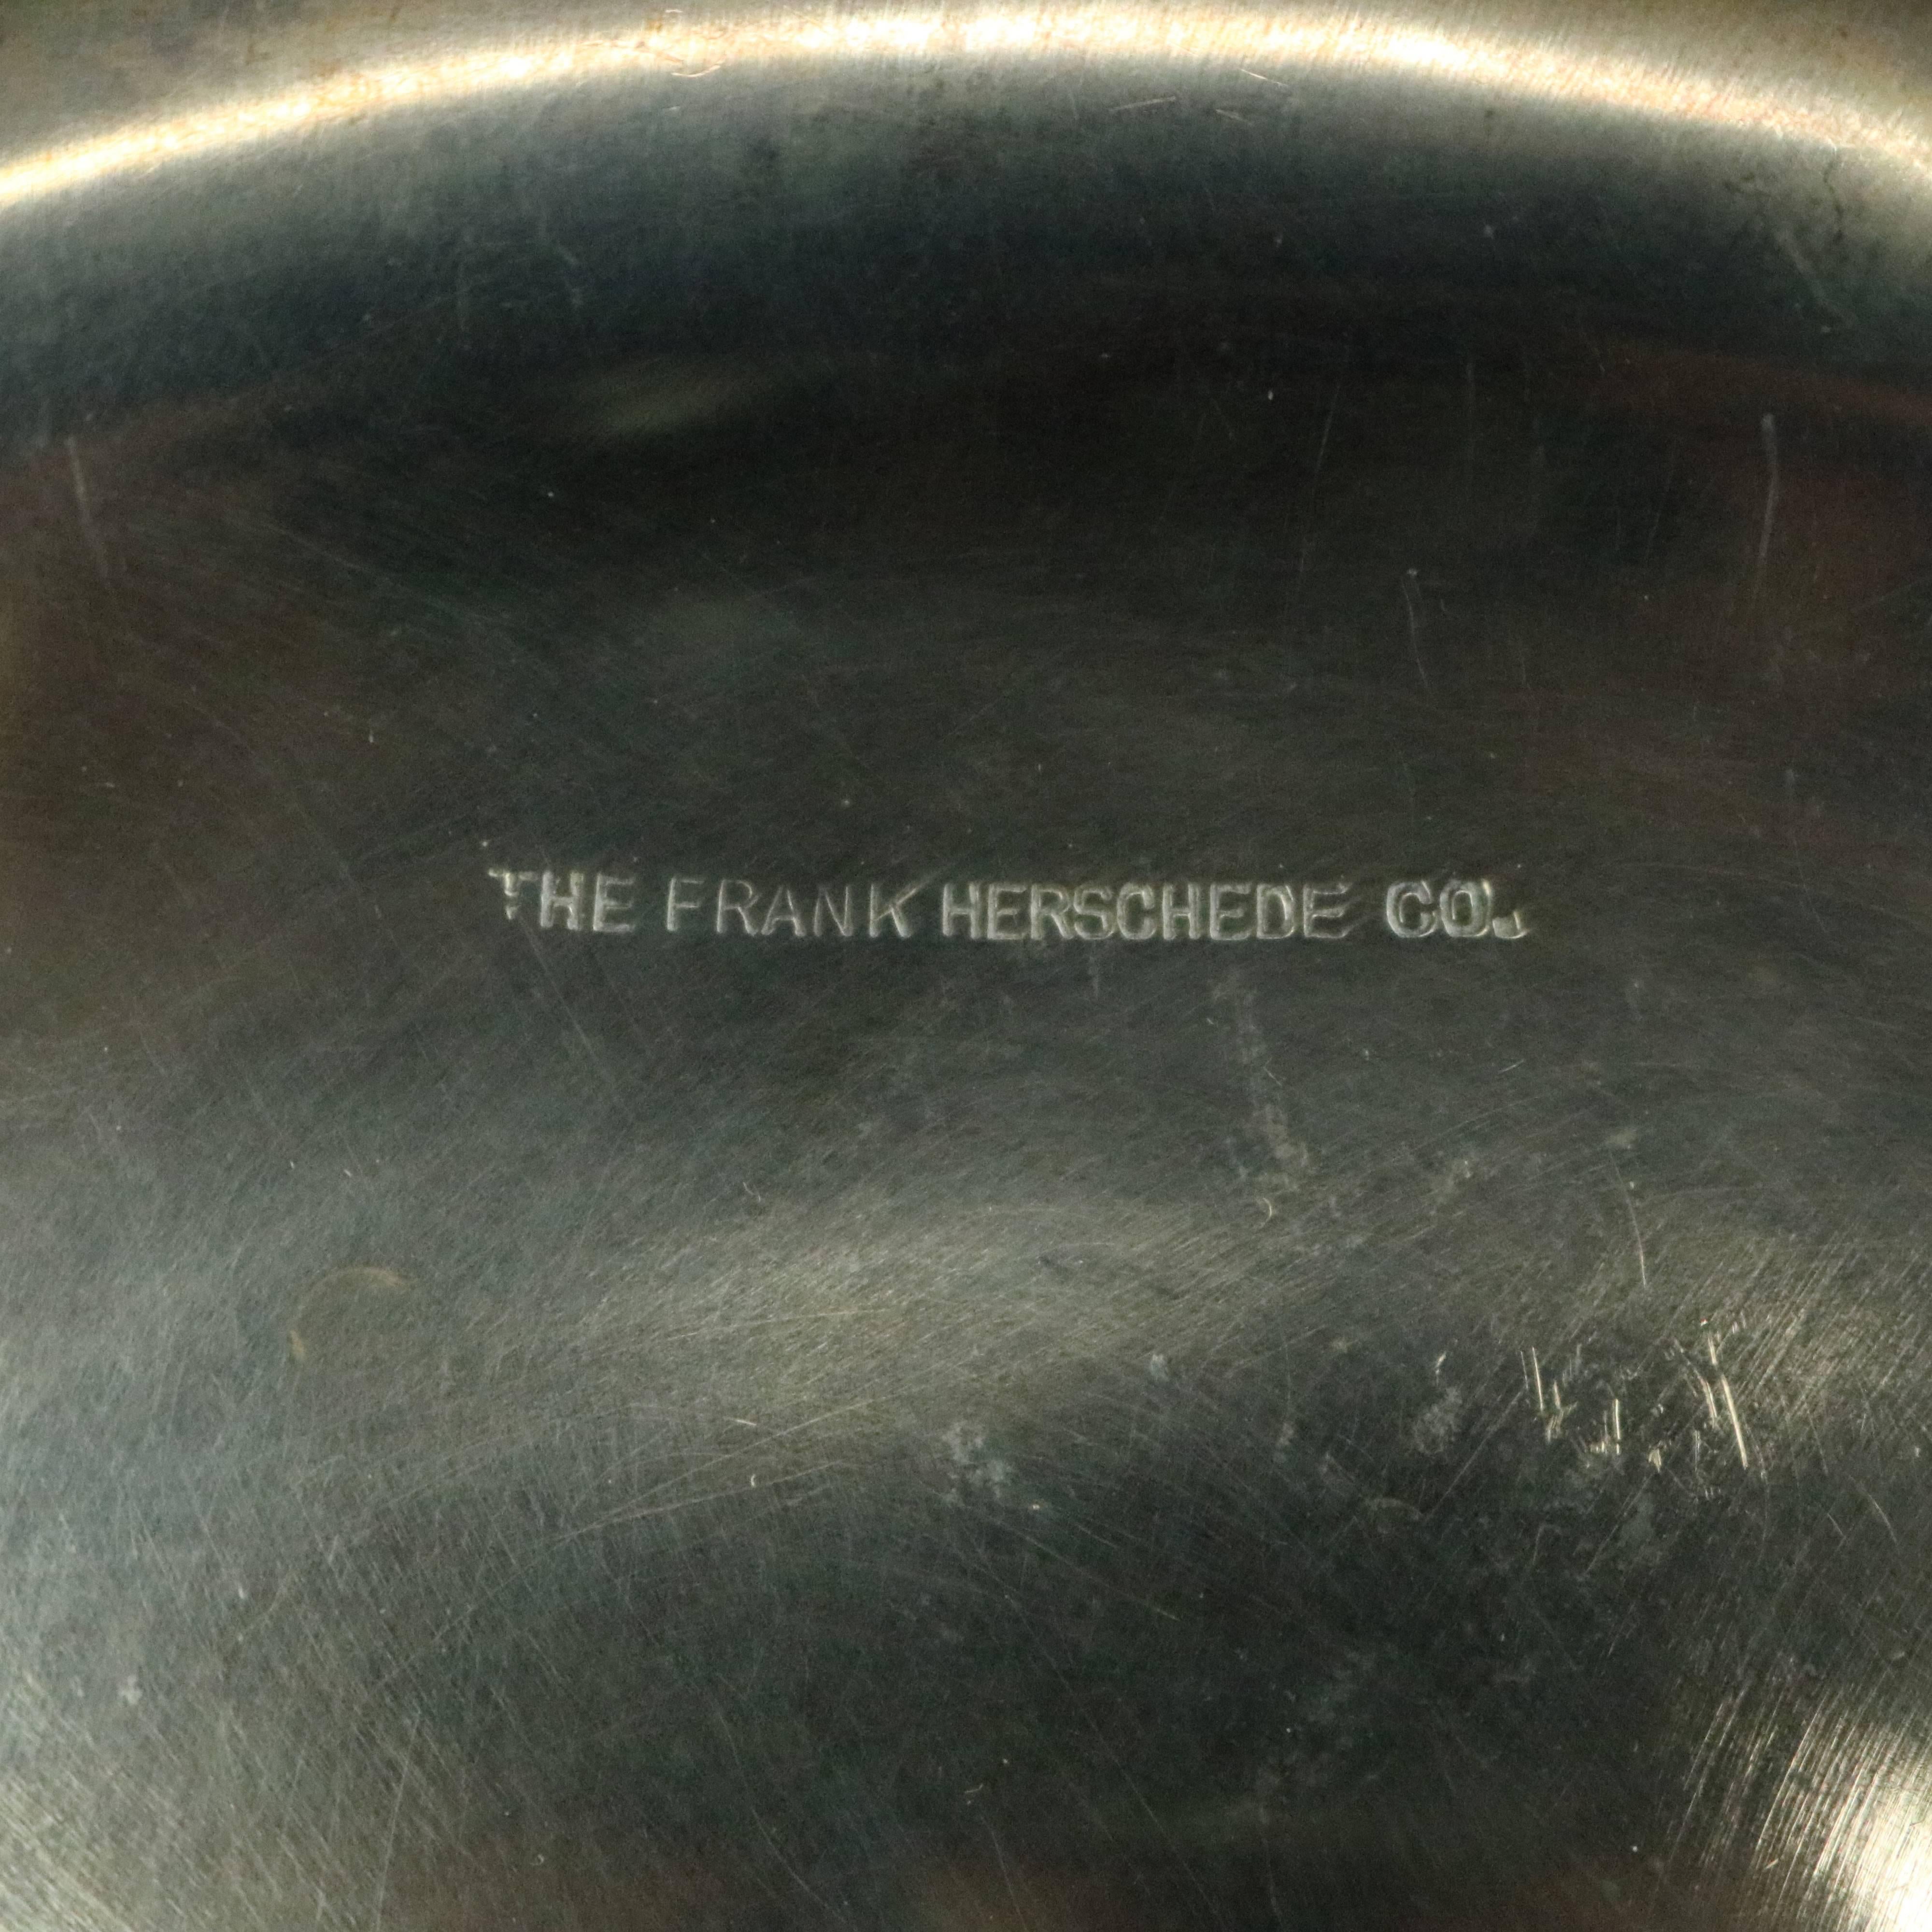 Antique Sterling Silver the Frank Herschede Co. Compote, circa 1880 3